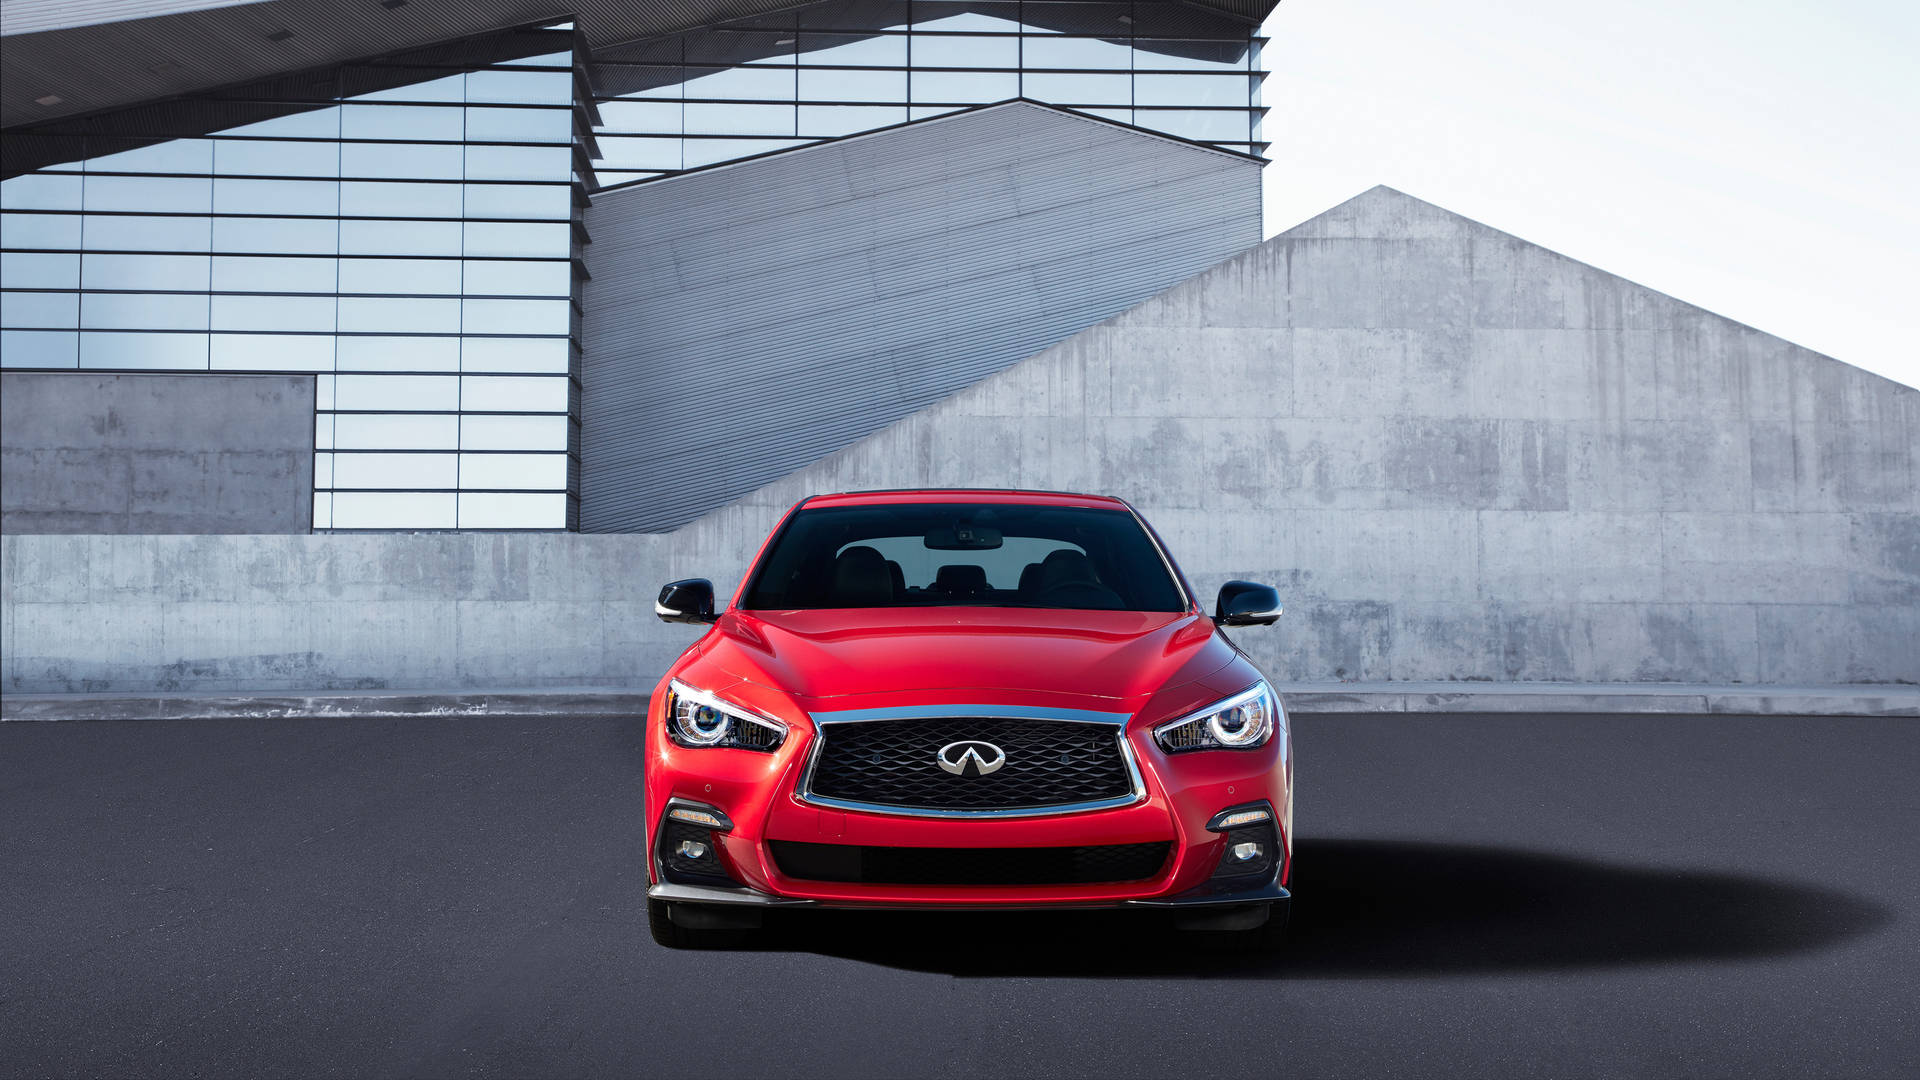 Stunning Red Infiniti Q50 On The Road Background